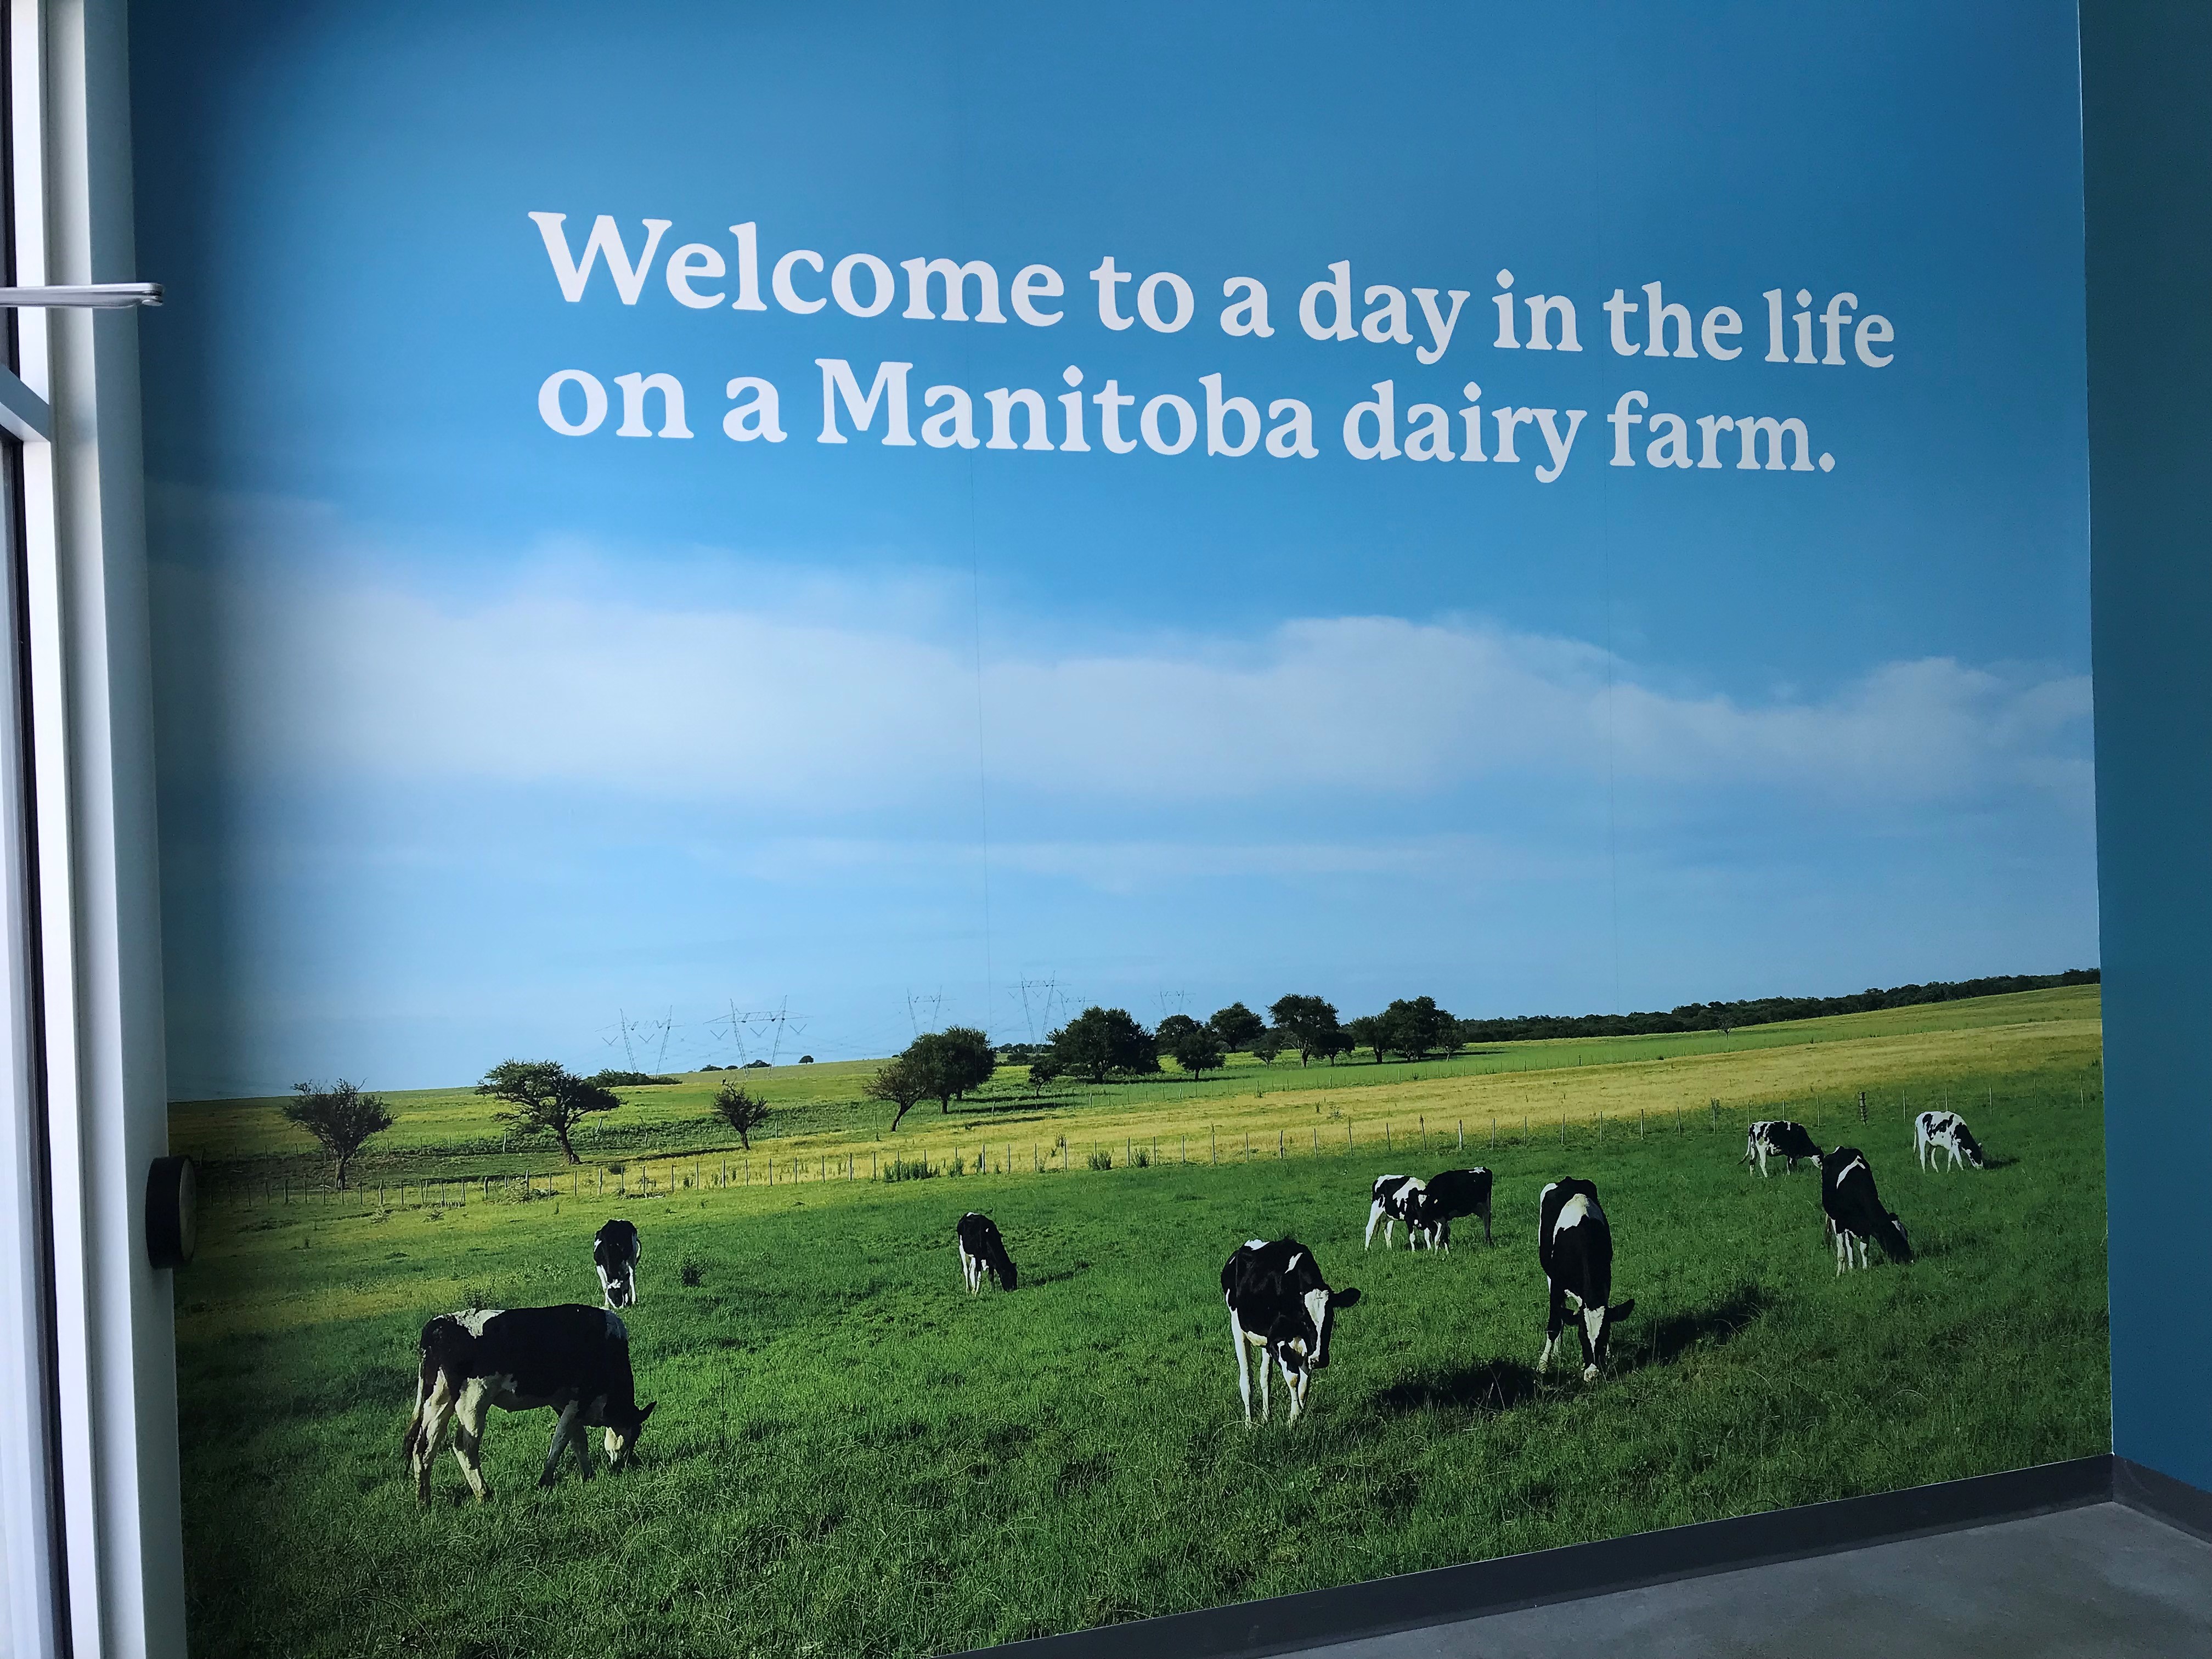 Welcome to a day in the life on a Manitoba dairy farm